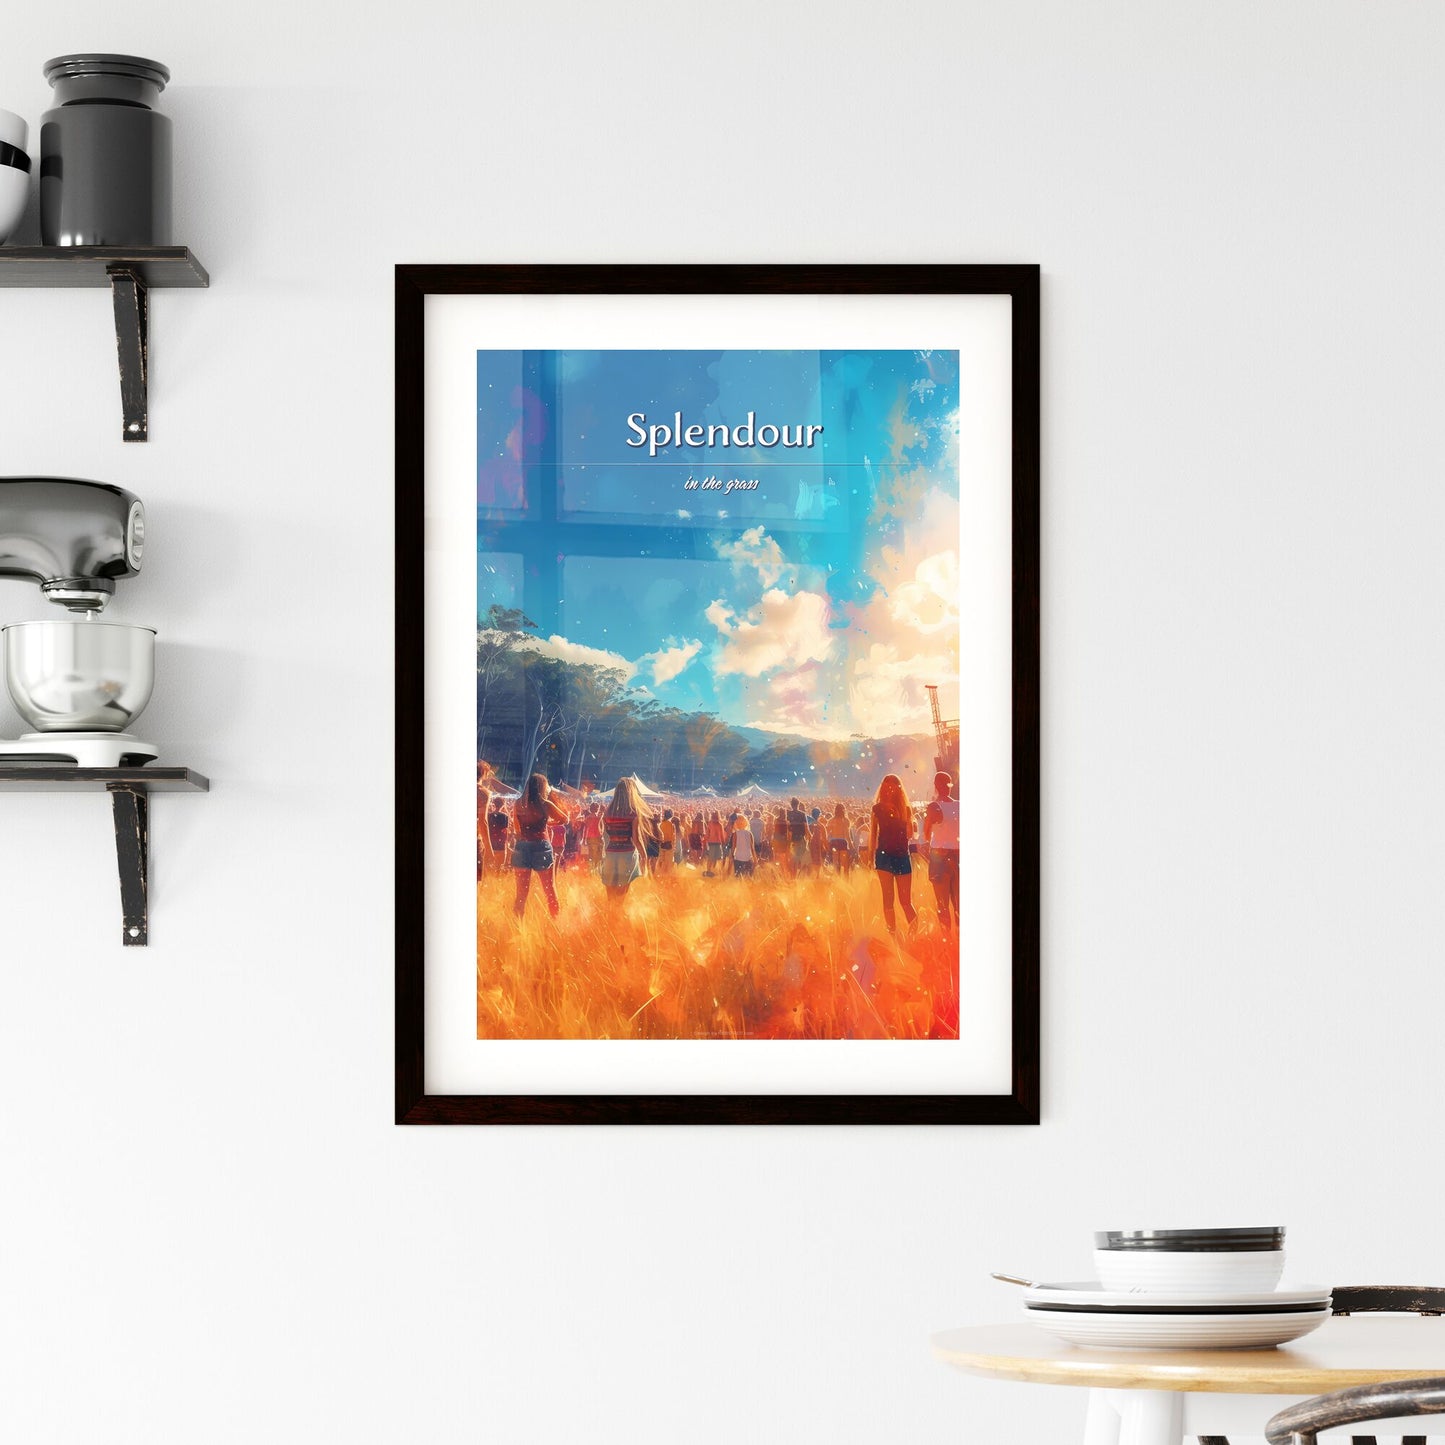 Splendour in the Grass - Art print of a group of people in a field Default Title